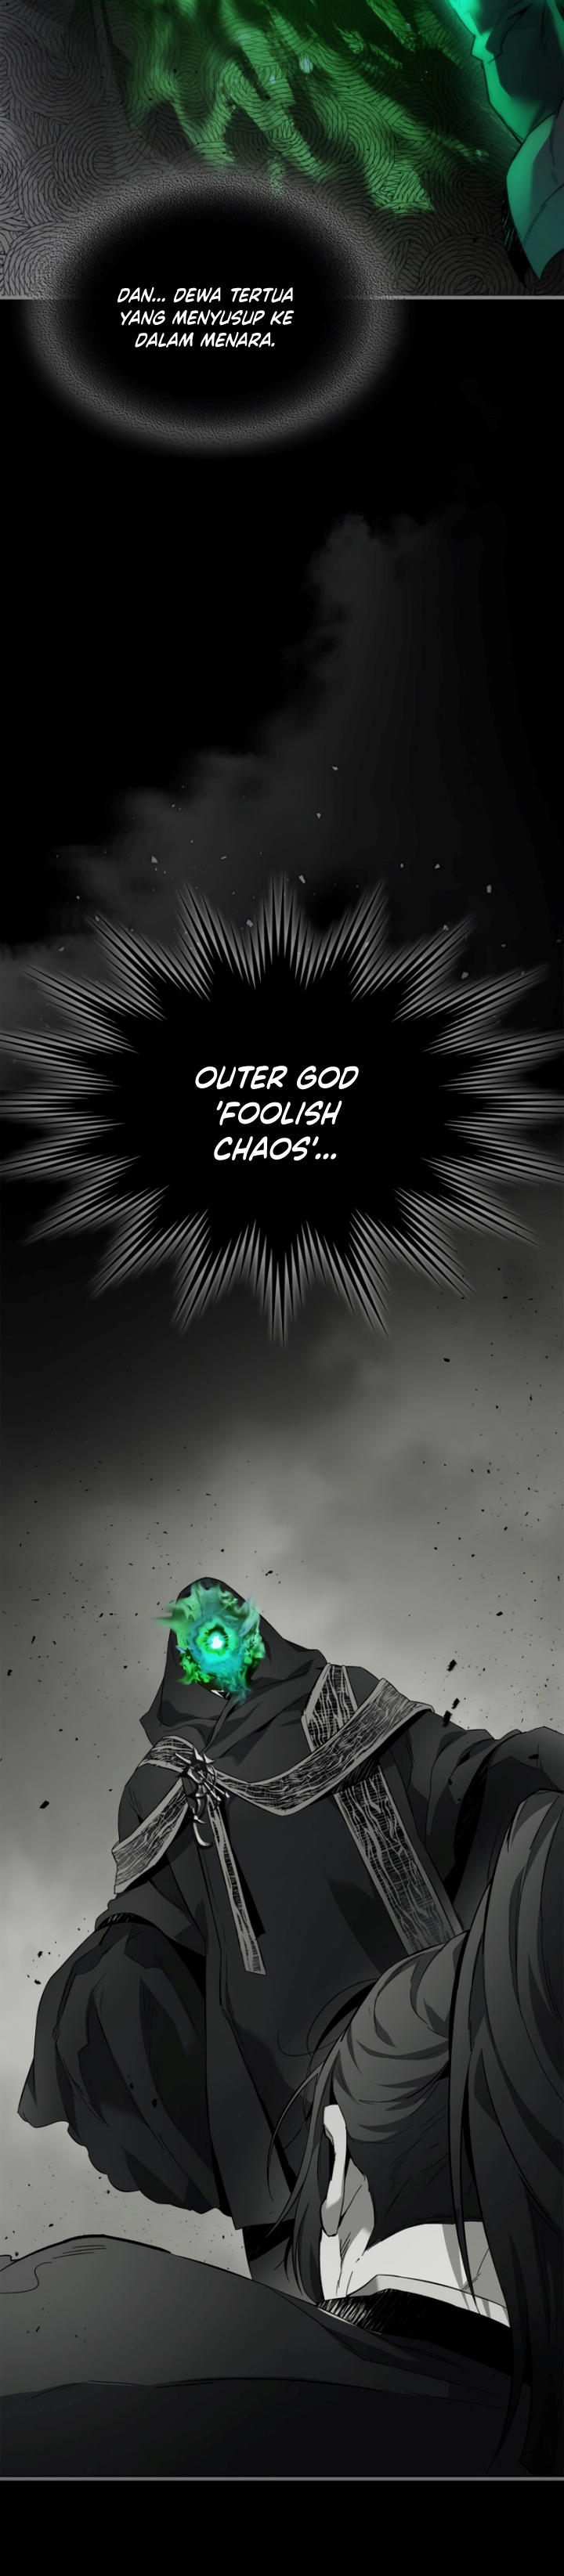 Leveling With The Gods Chapter 79